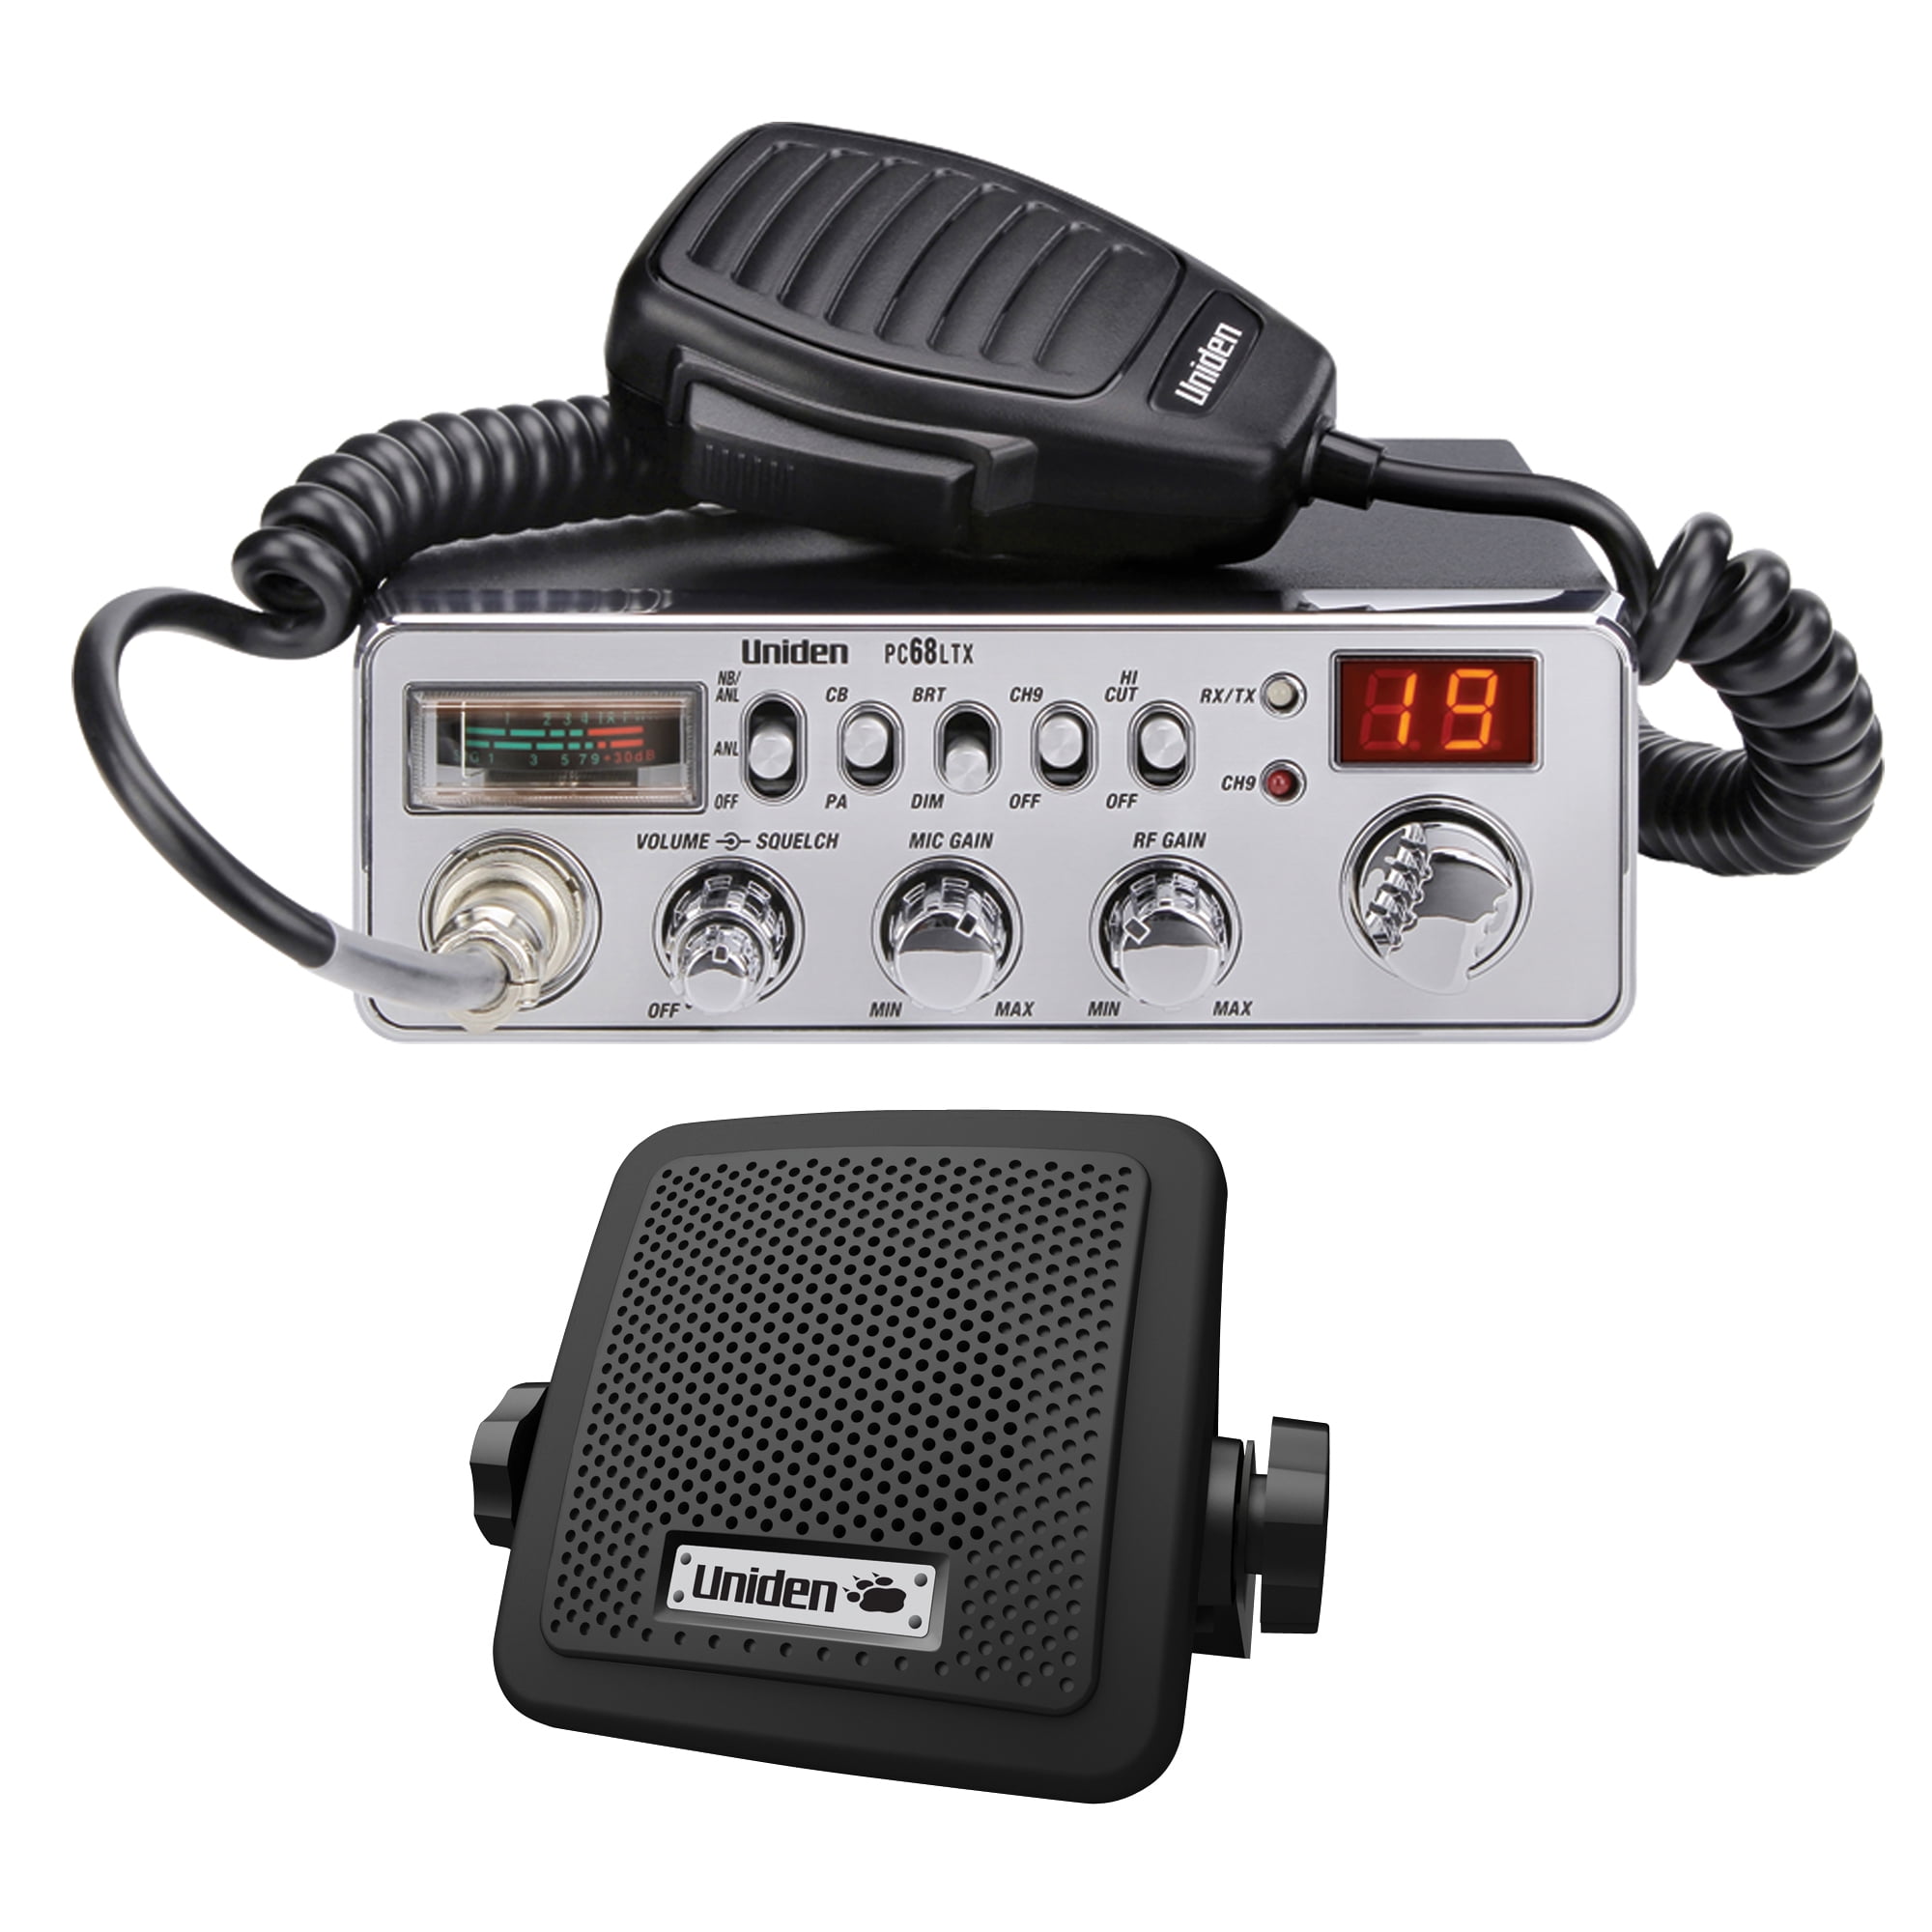 5 Items Includes Uniden PC68LTX 40 Channel CB Radio with Shark Antennas 2ft CB Antenna Mirror Mount Uniden PC68LTX Radio and Accessory Bundle 12 Coax and Ham Guides TM Quick Reference Card 